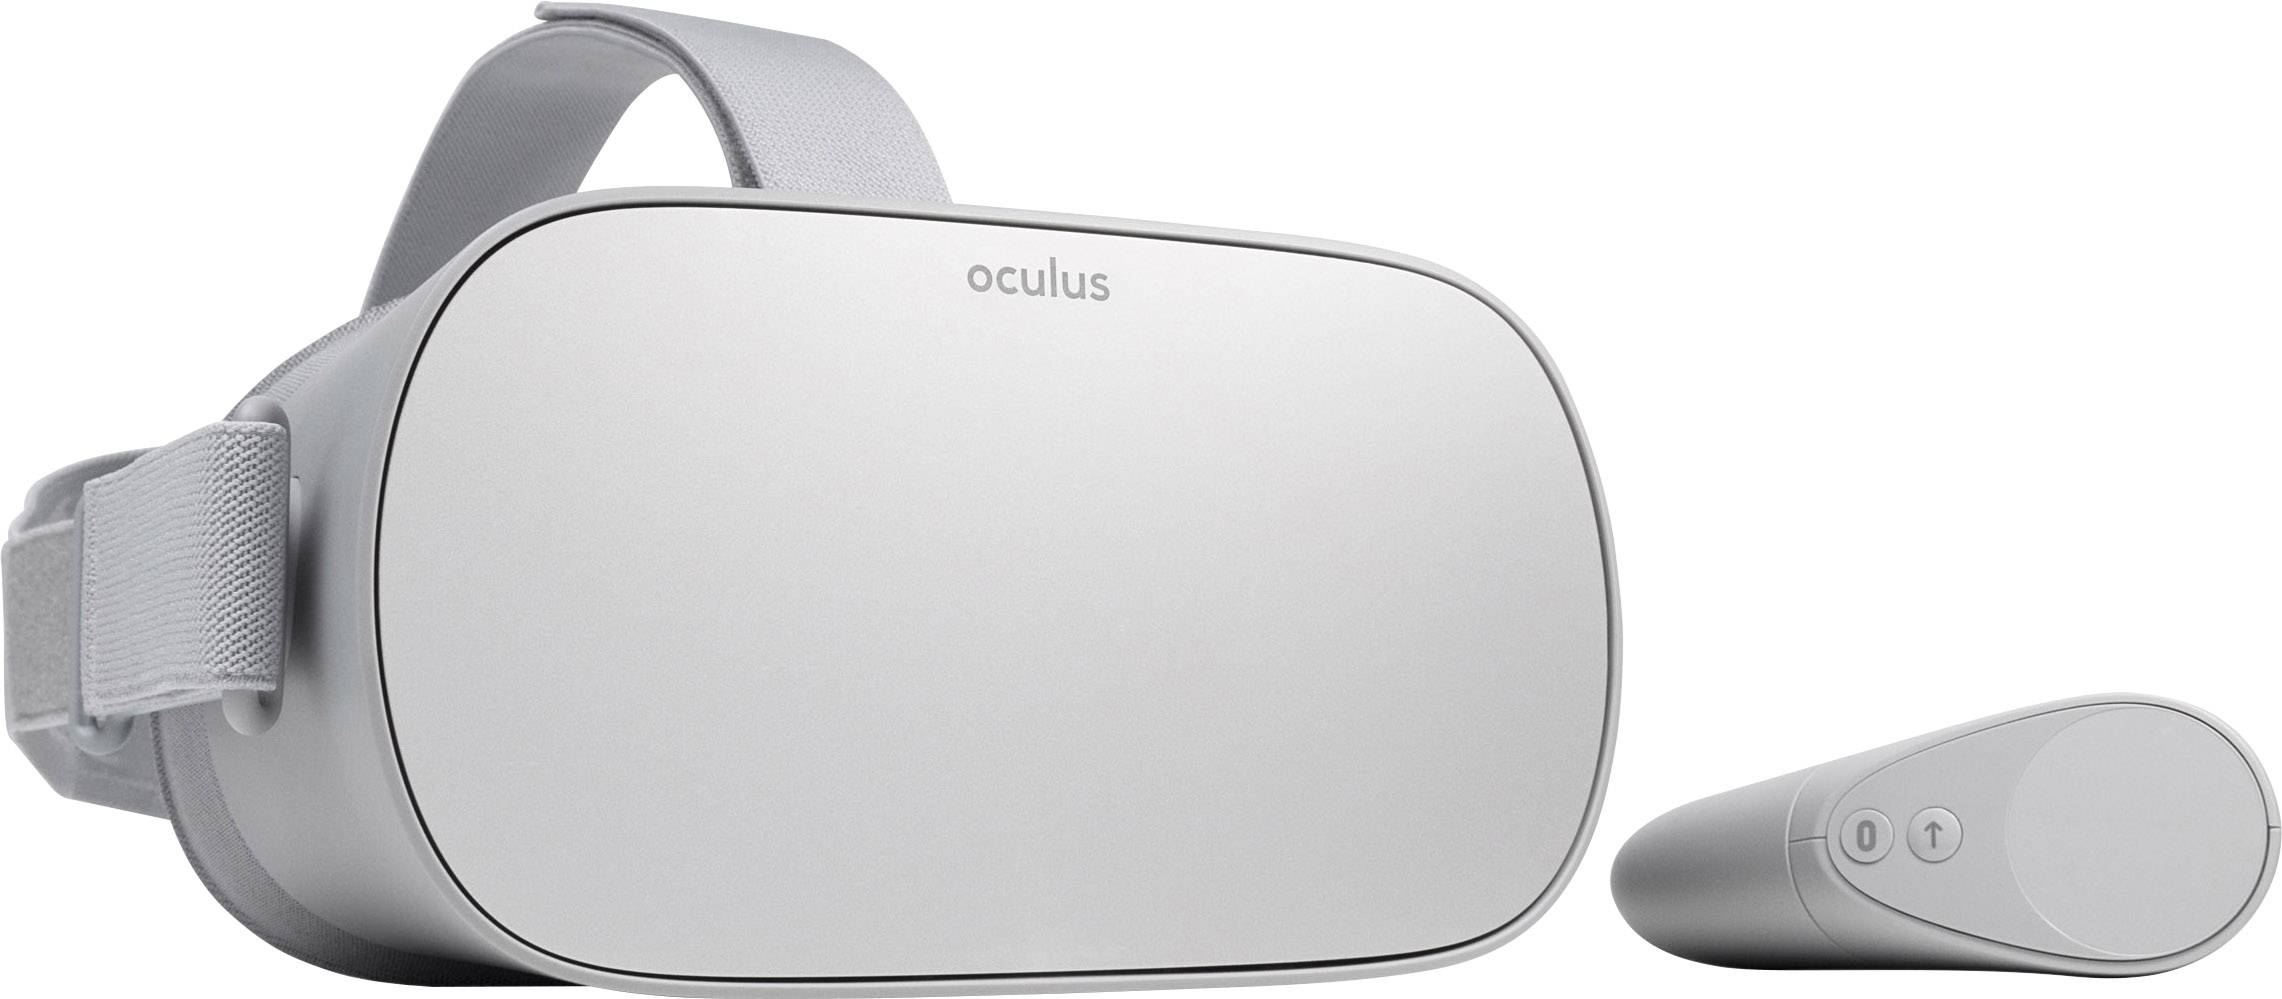 oculus go with glasses